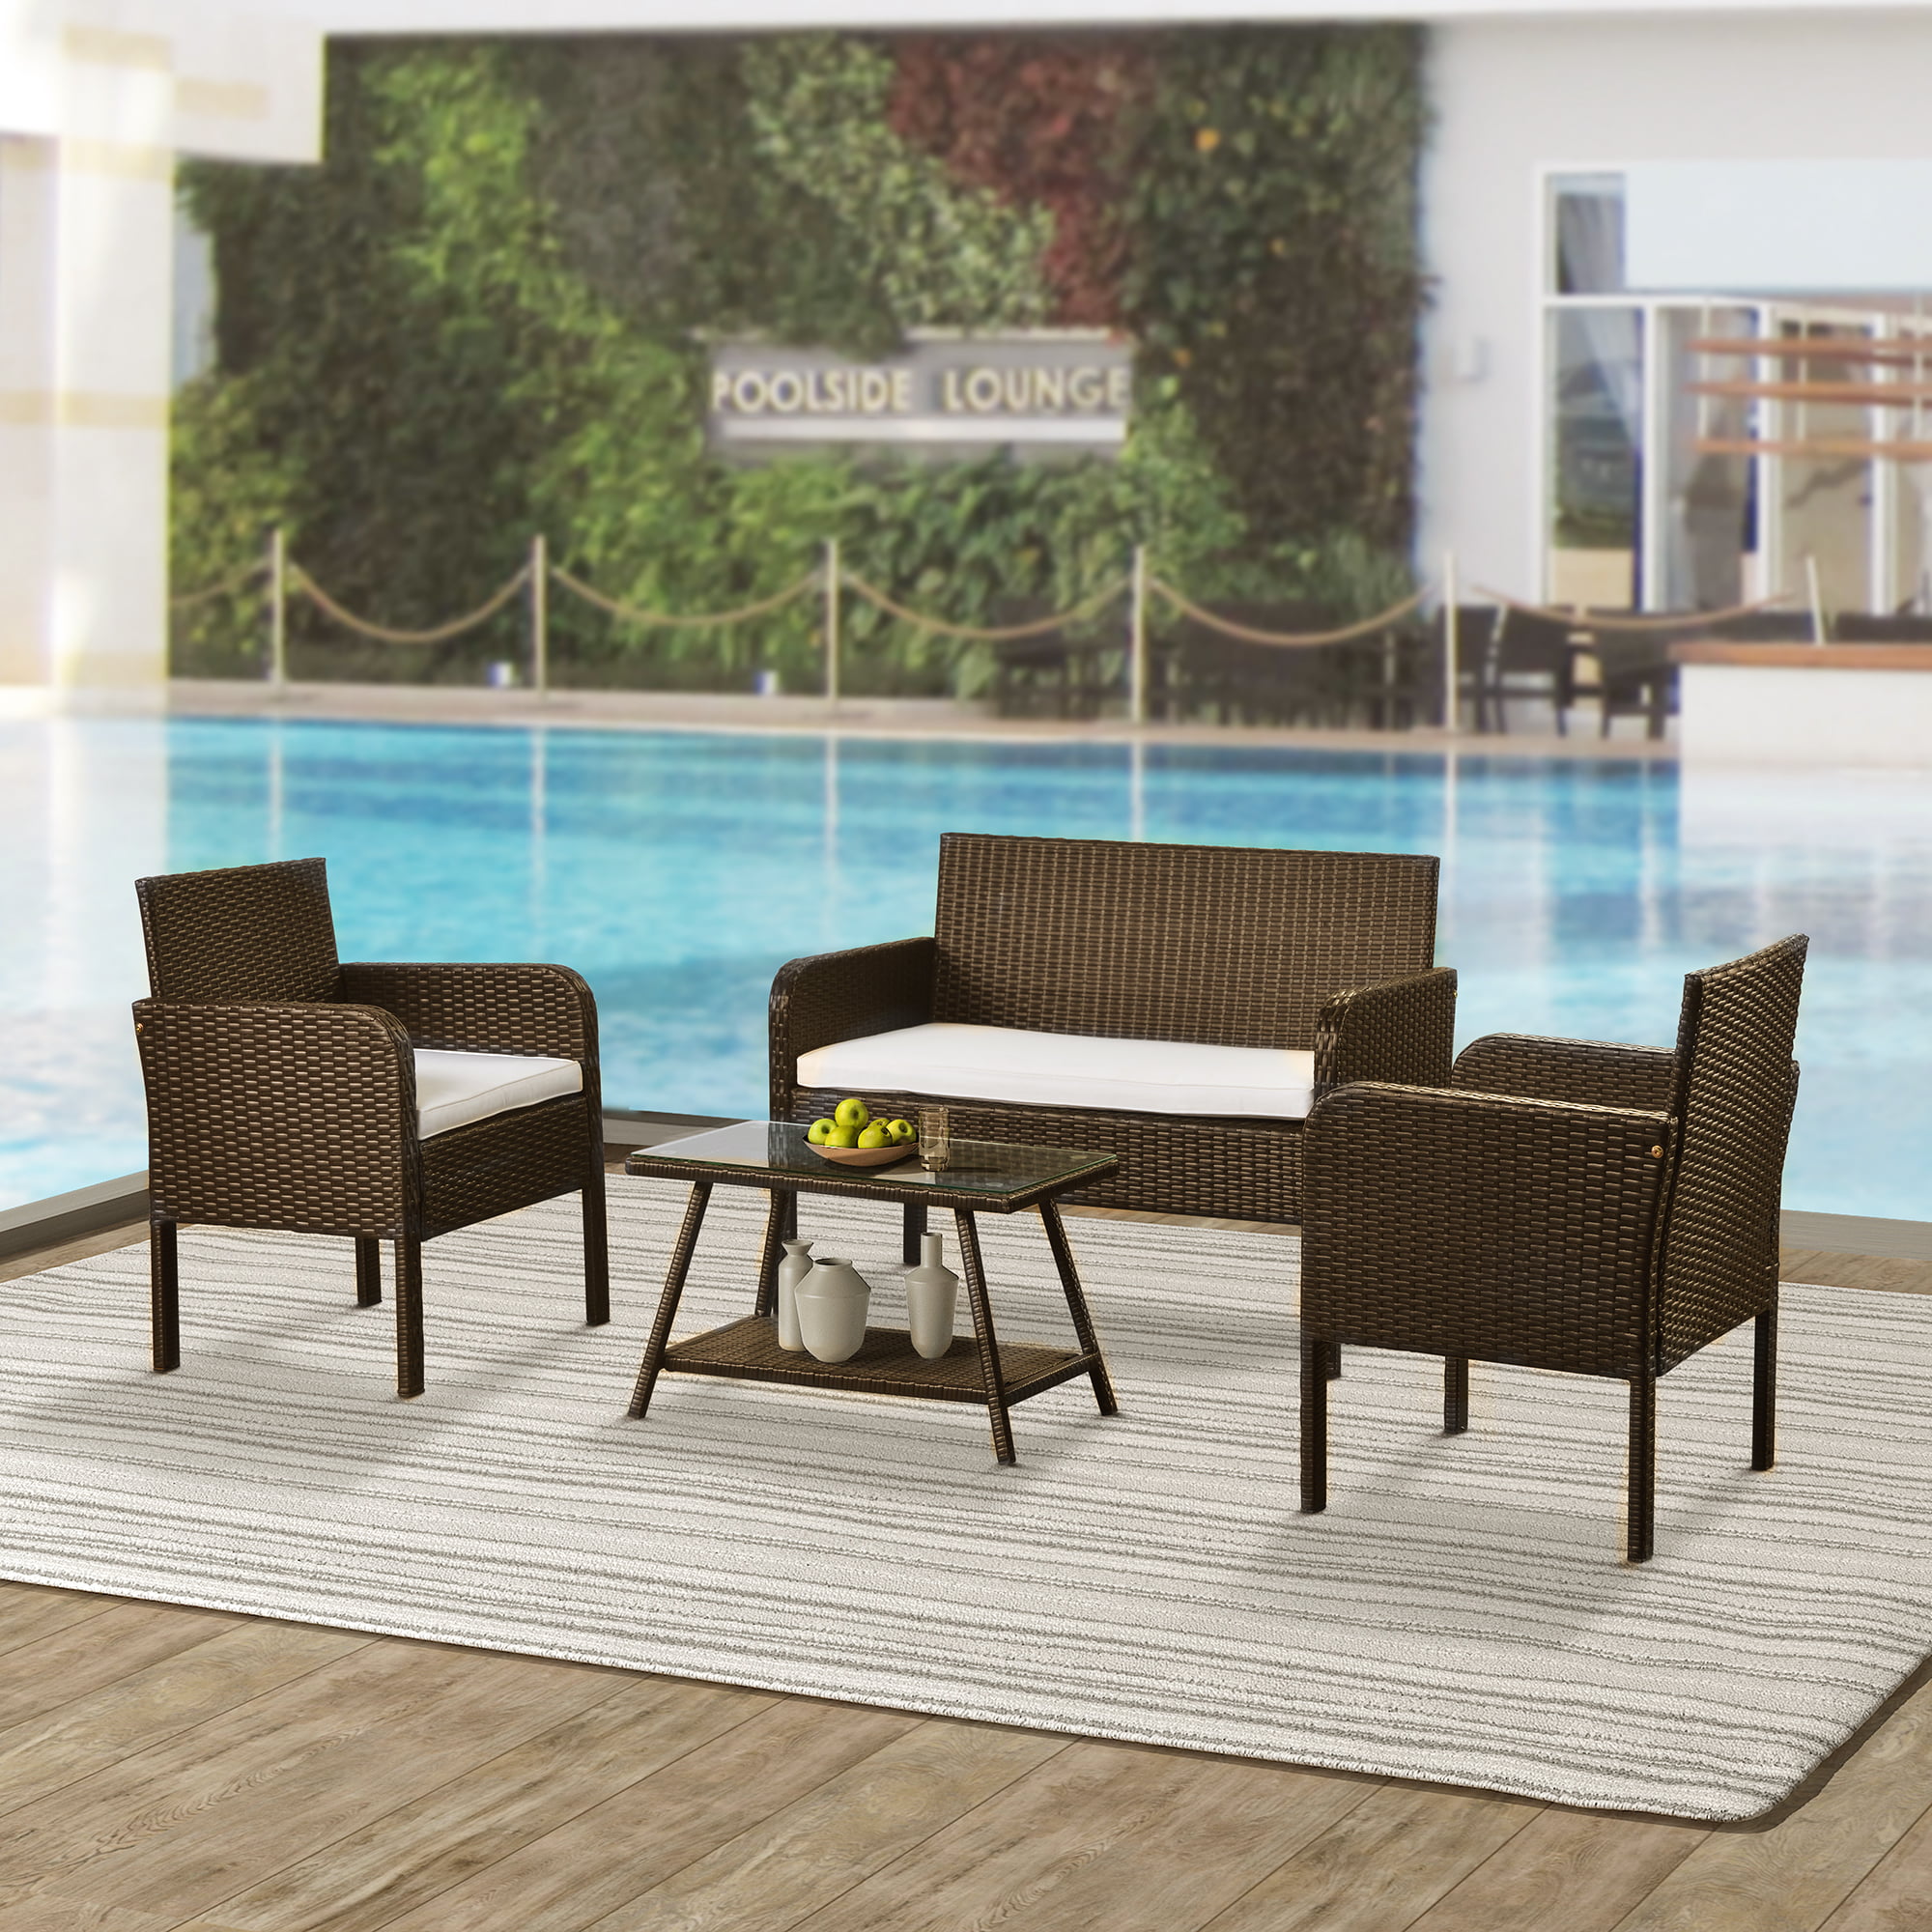 Details about   Home New Rattan Iron Wicker Lover Chair Patio Pool Furniture Garden Balcony Seat